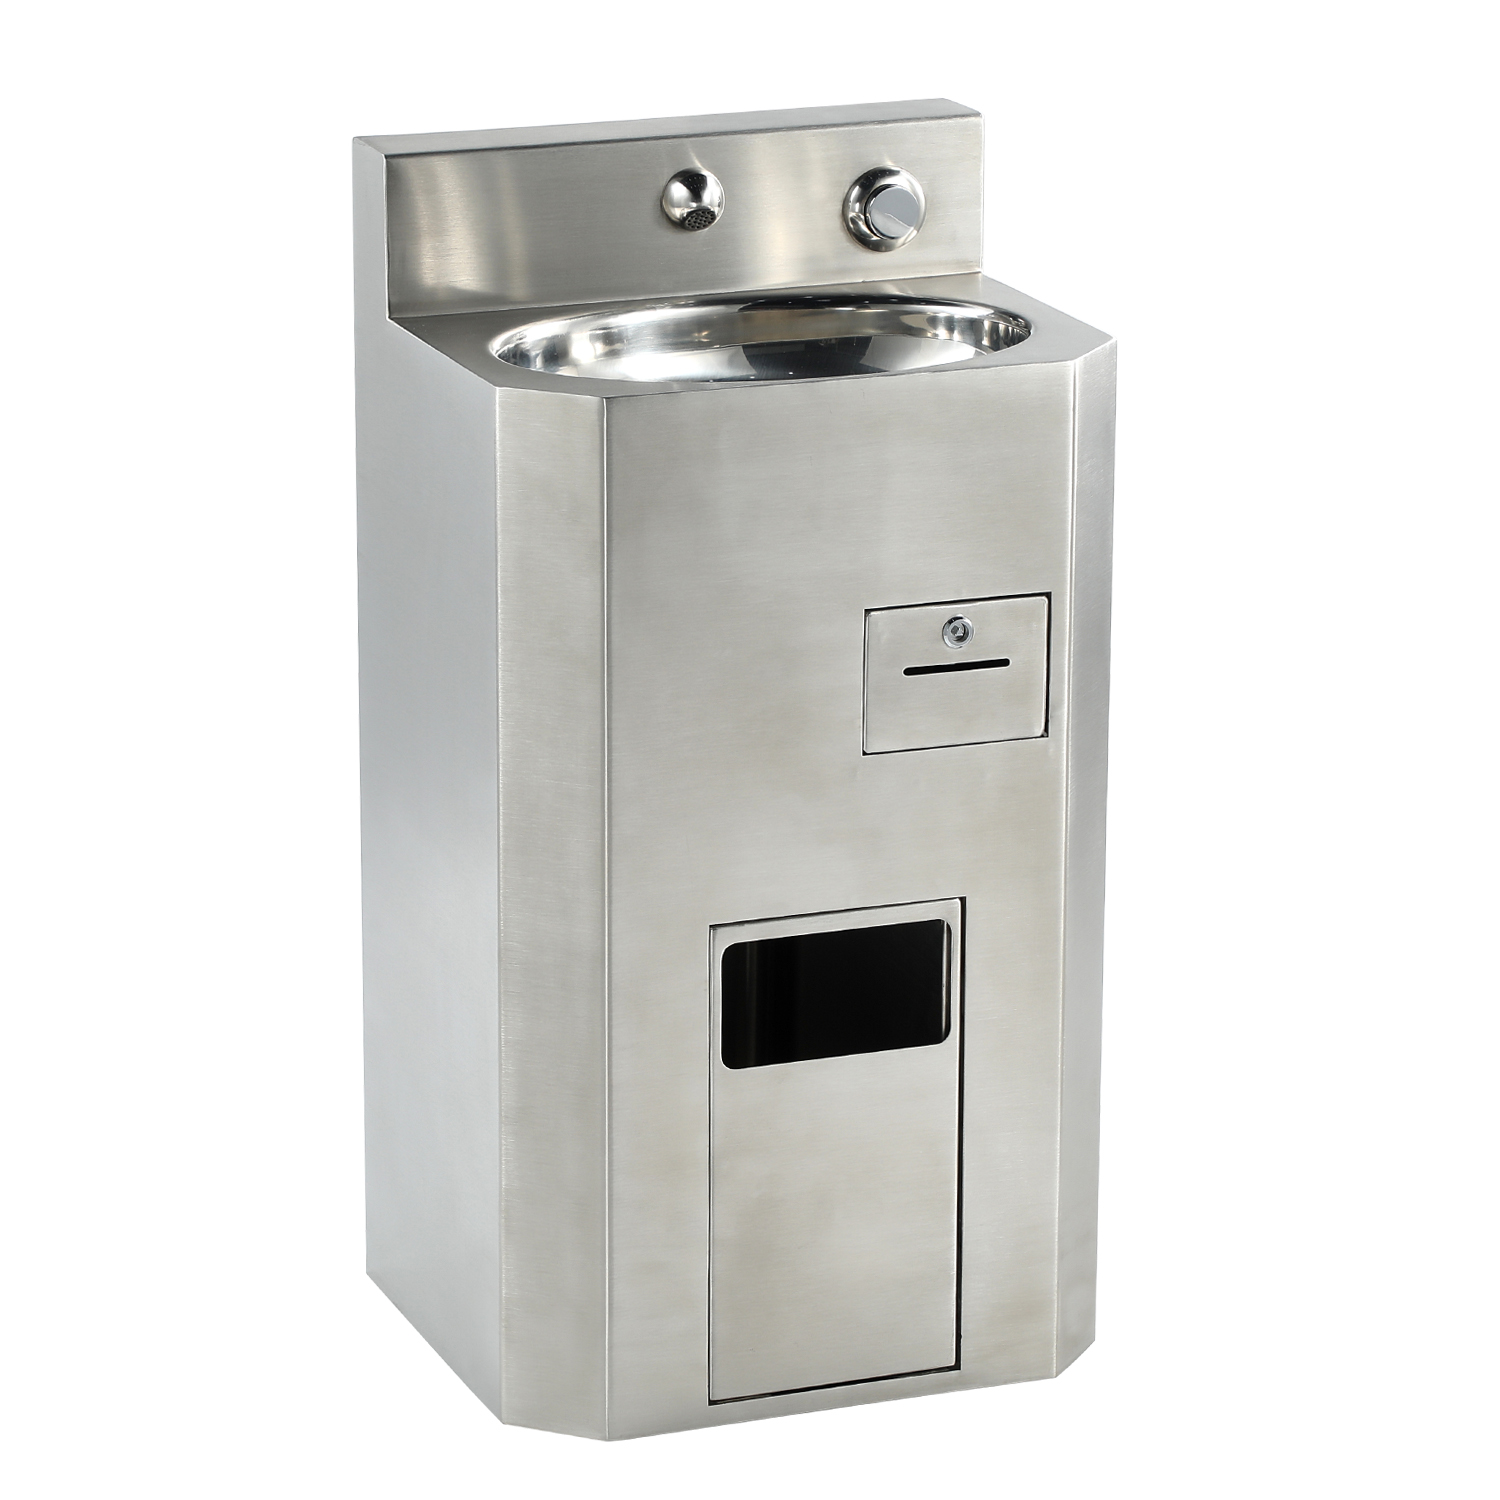 stainless steel wash basin with trashcan&wash button